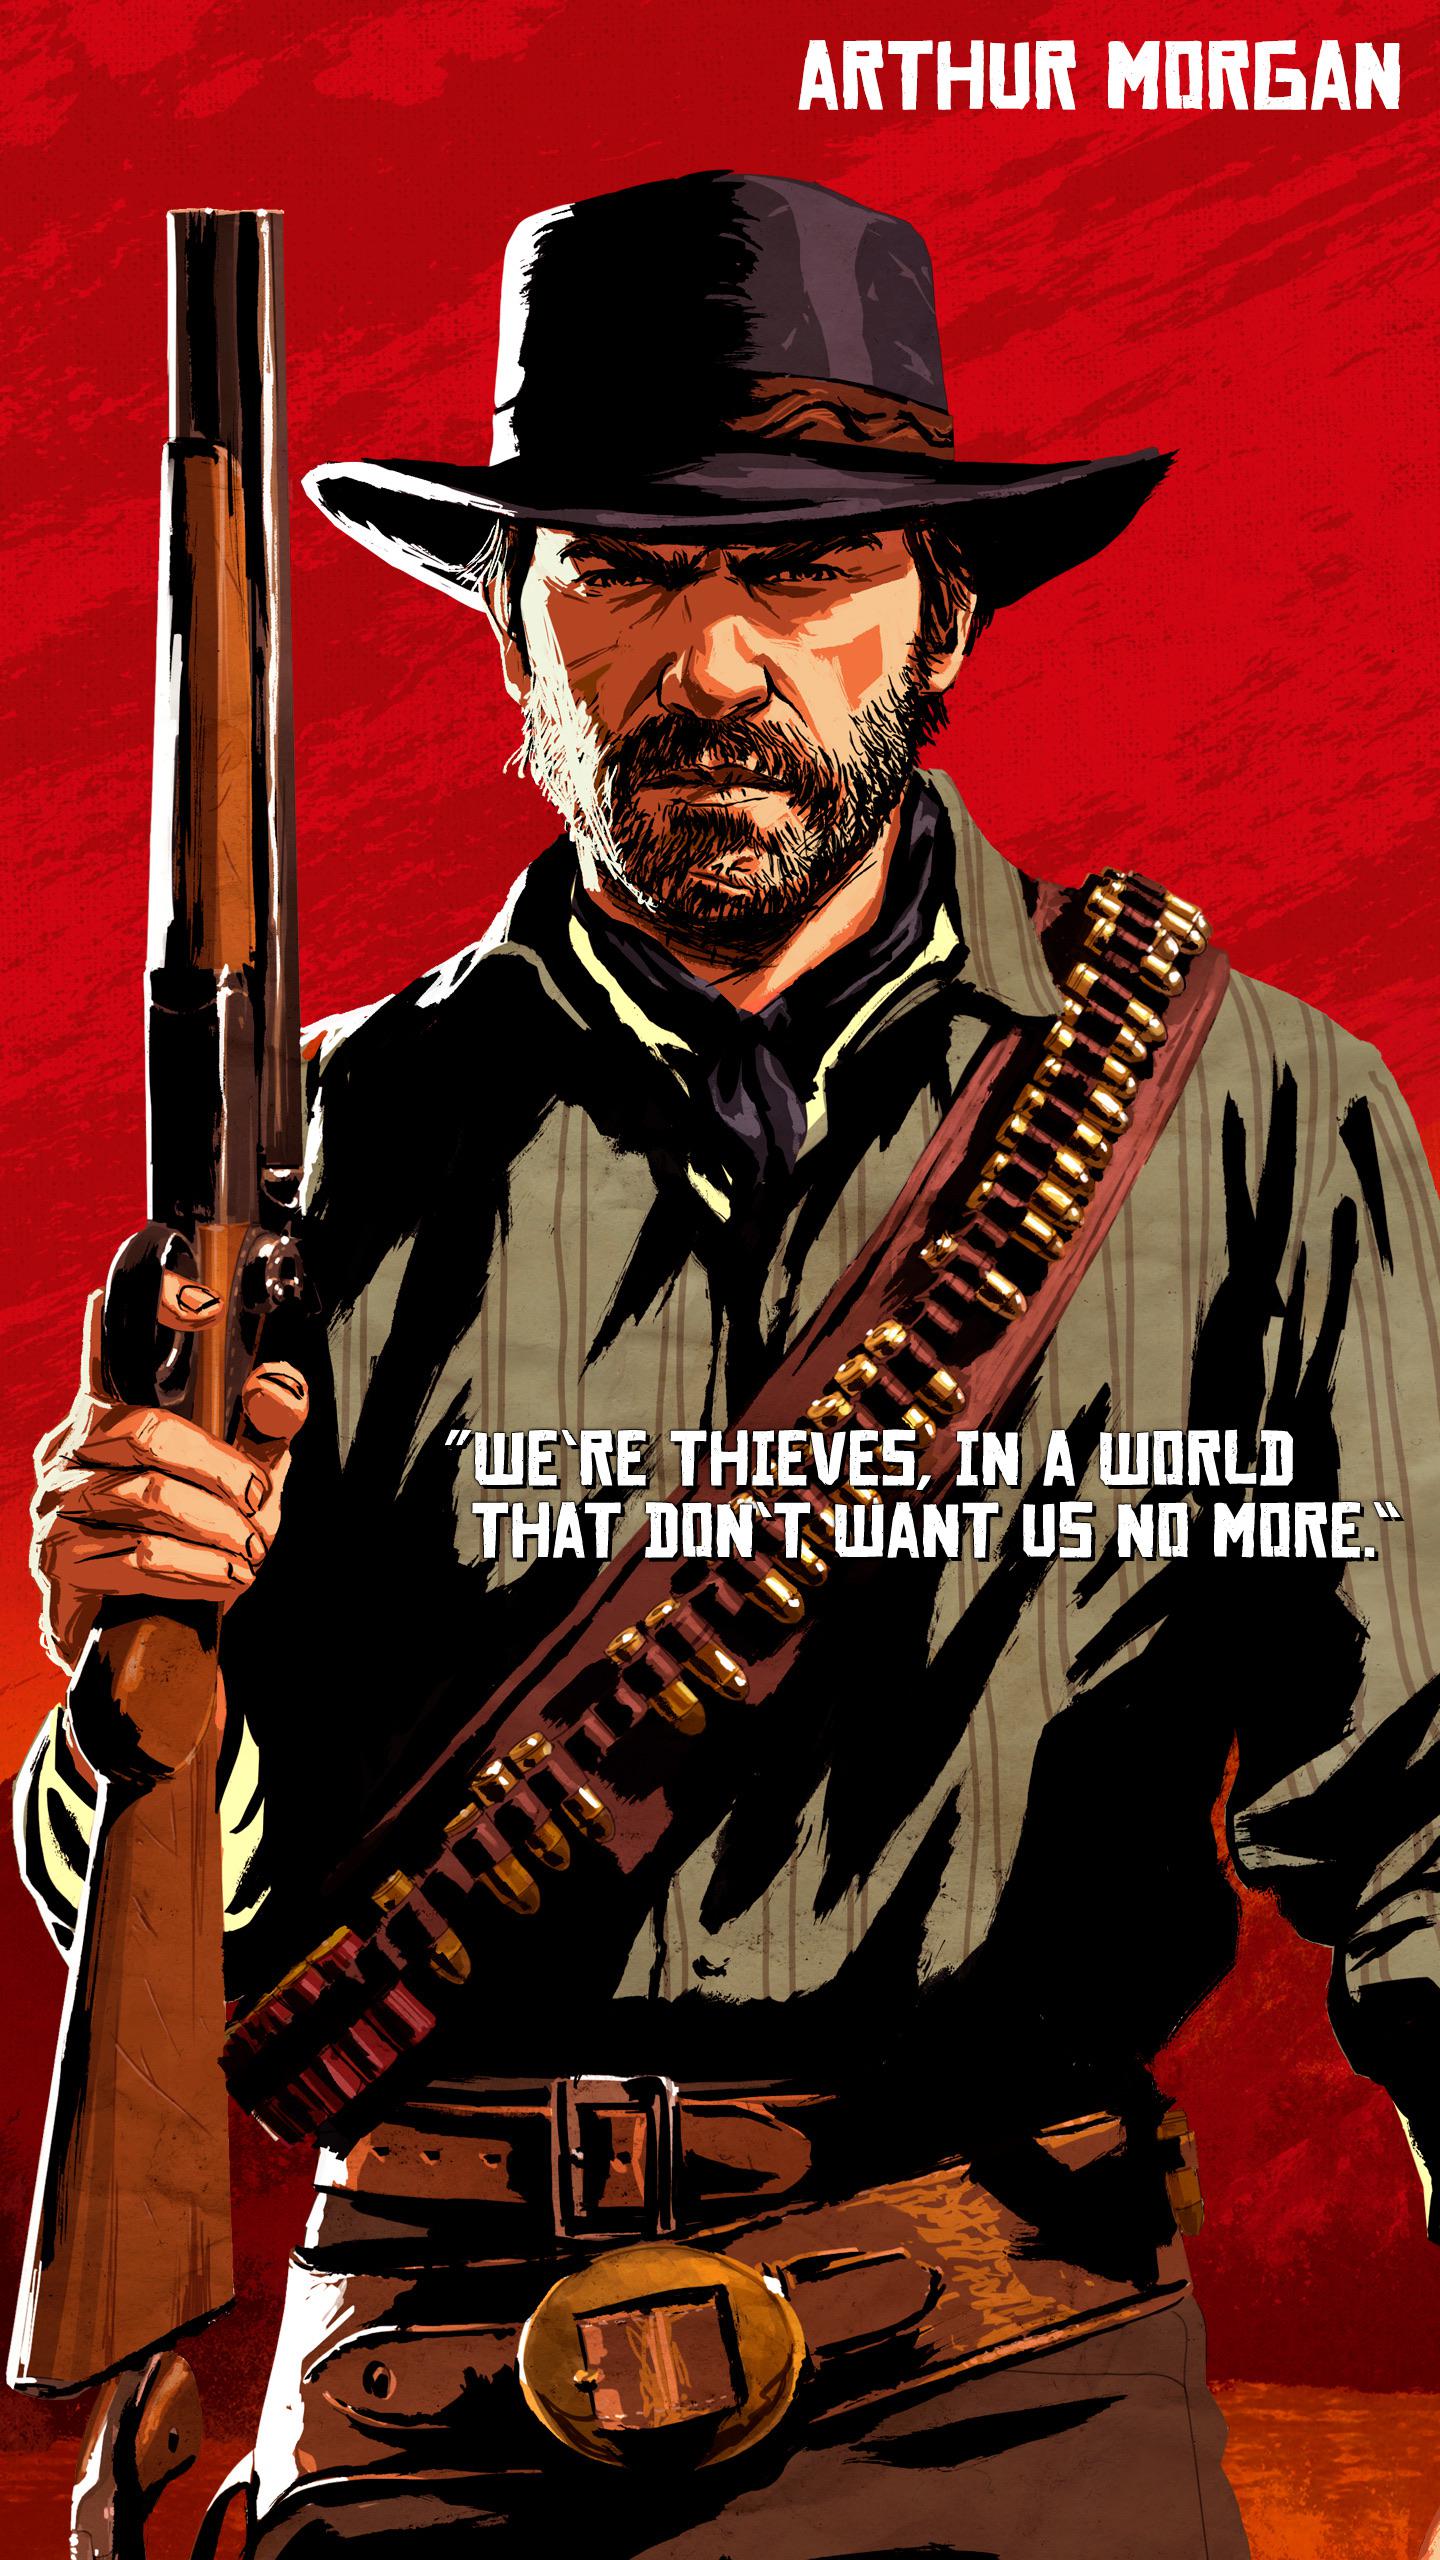 My favourite IPhone wallpaper from Rockstar